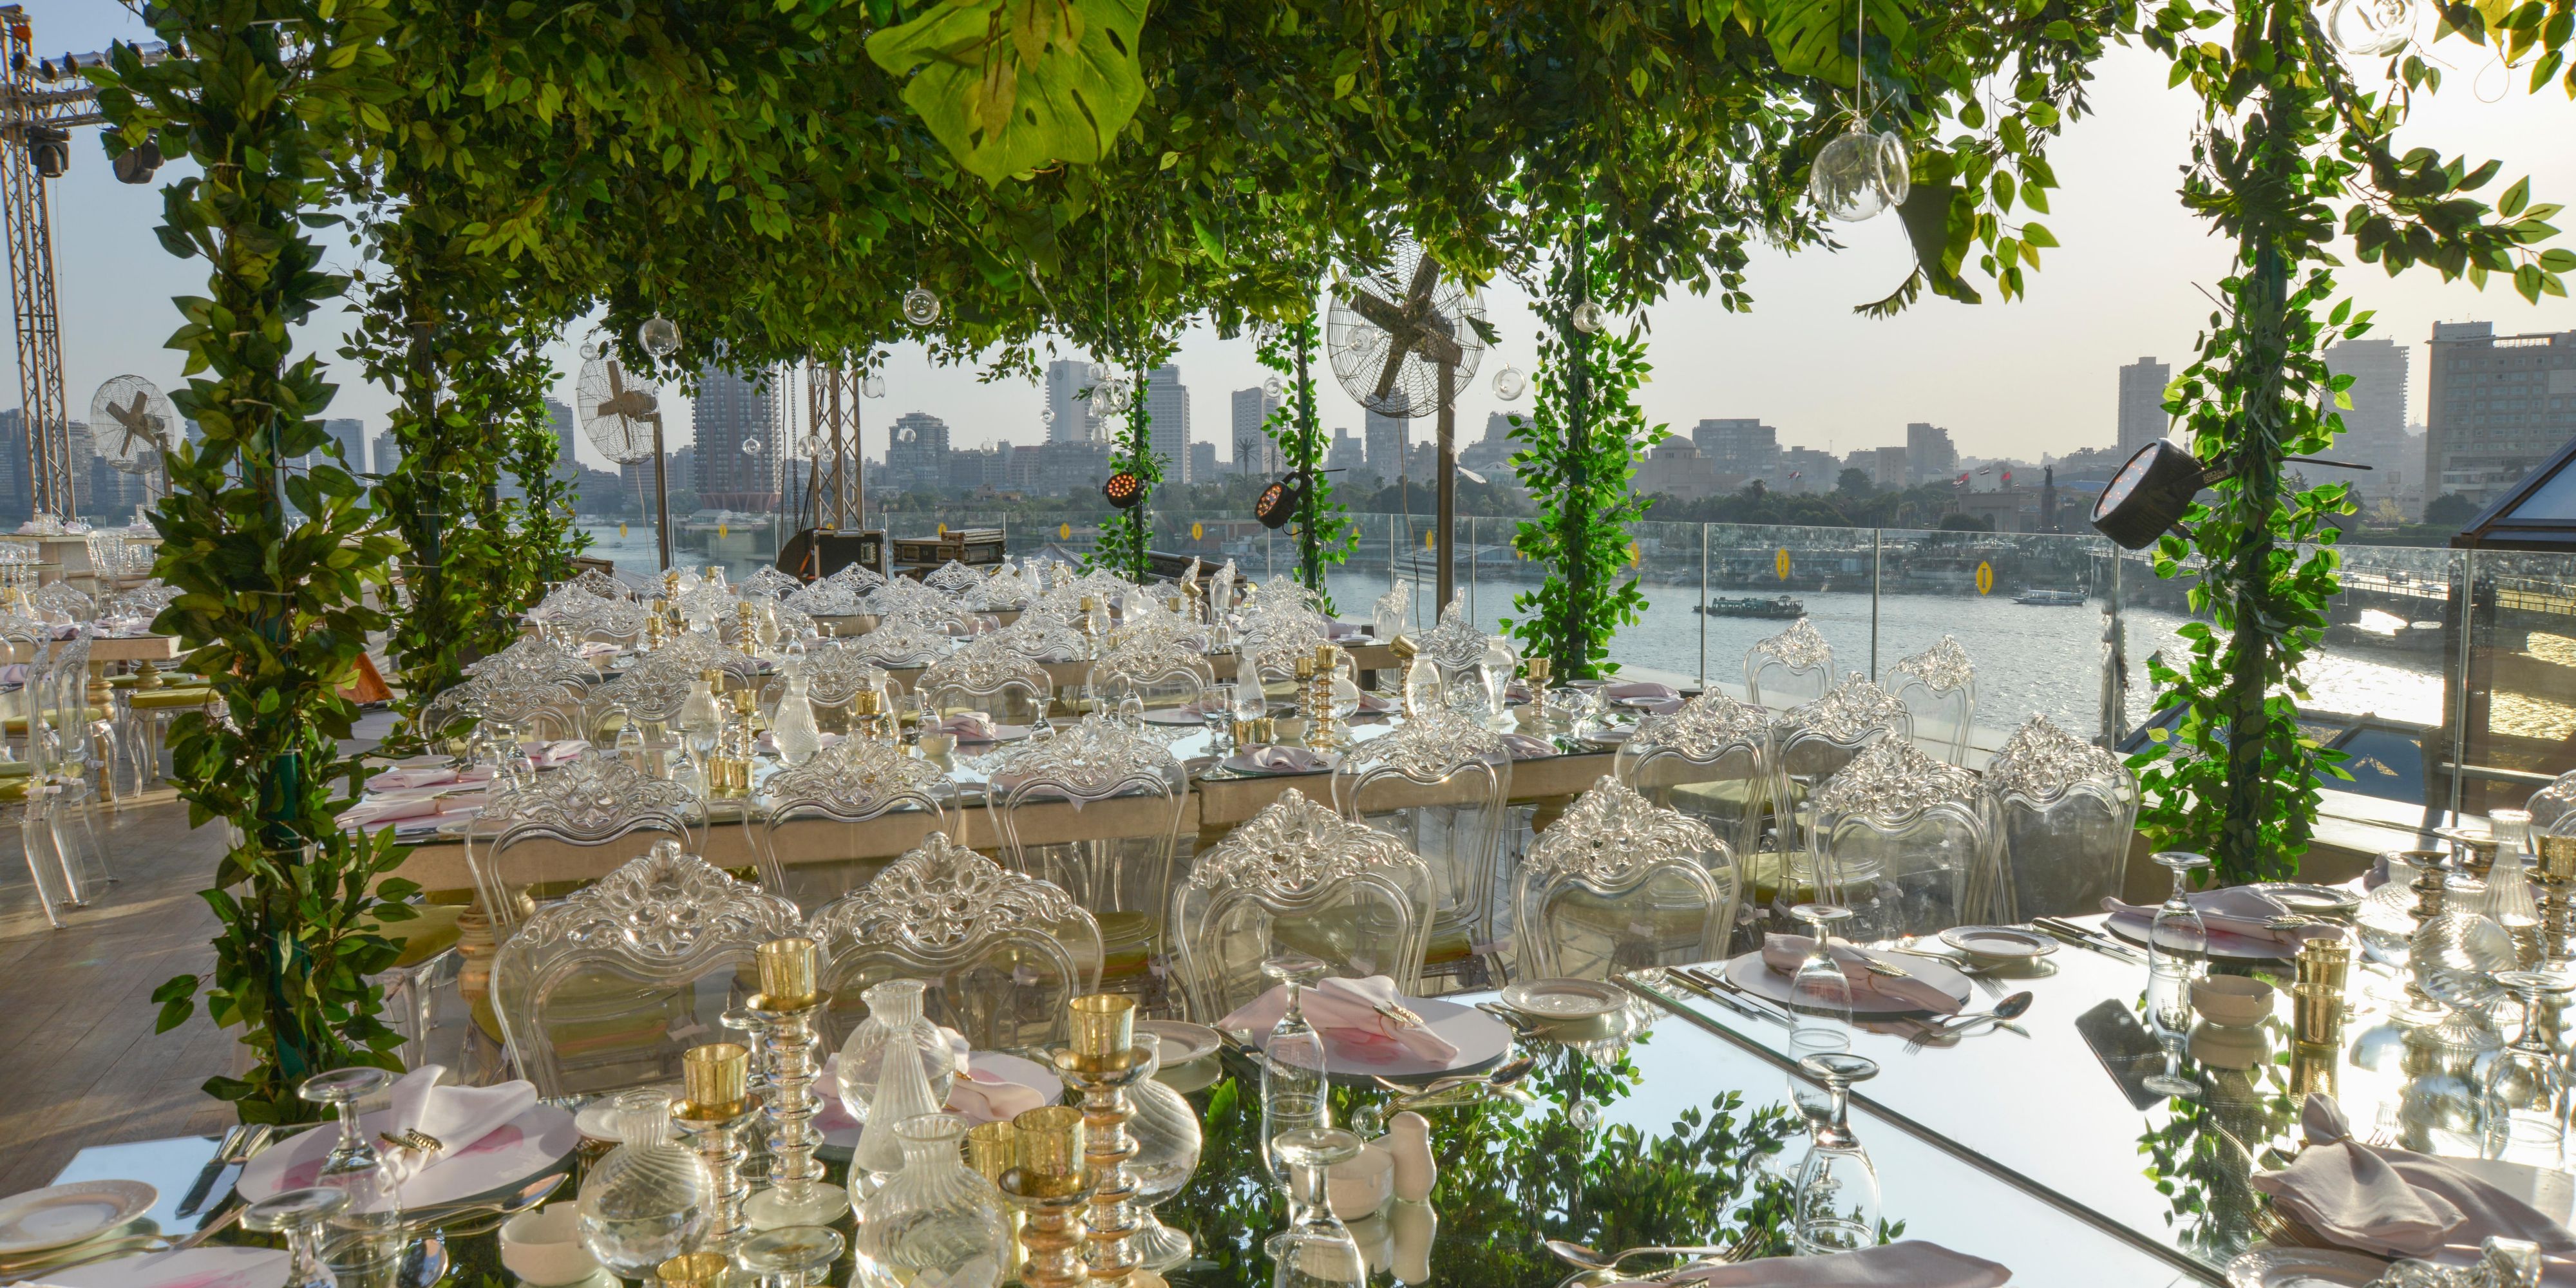 At Semiramis InterContinental Cairo, we draw on the heritage of the region by offering a number of entrancing wedding venues. The splendid setting of the new Cleopatra can host up to 1,200 guests for the grandest of occasions whilst Teeba, Nile Terrace and Pool Terrace offer stunning Nile views. Let our experienced team help plan your perfect day.